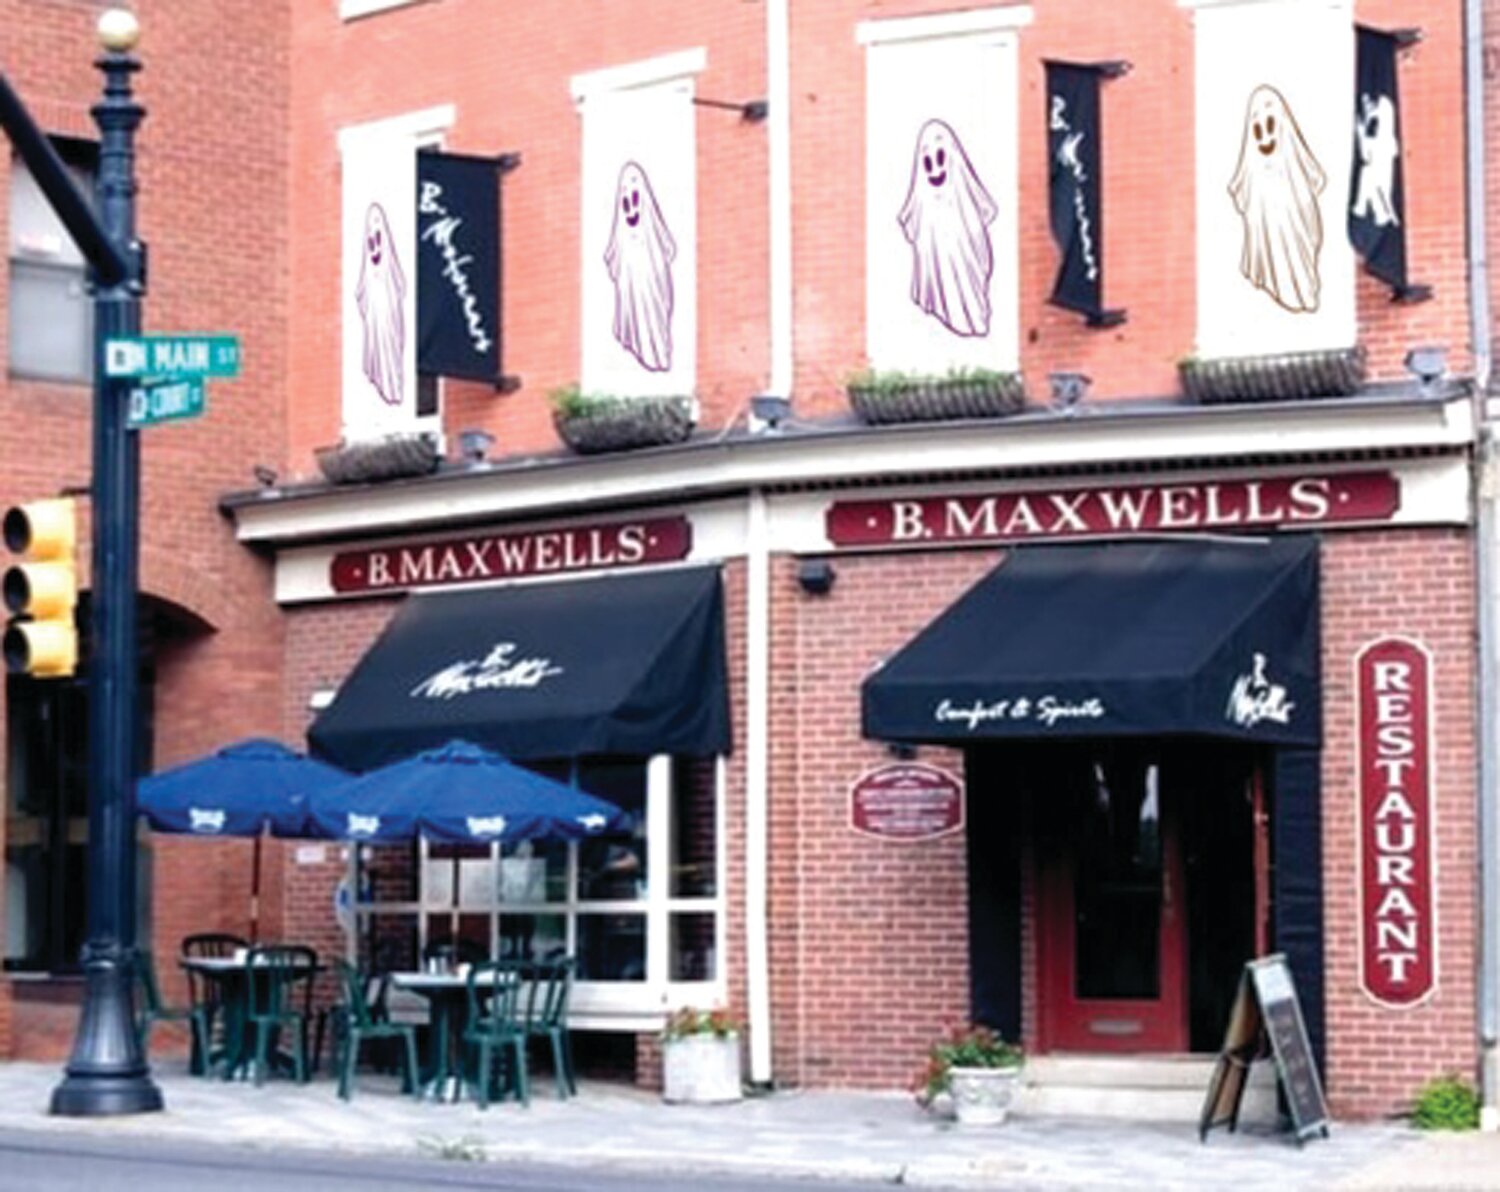 Editor’s Note: This photo was digitally altered by the Doylestown Historical Society to add four ghosts in the second floor windows of B. Maxwell’s as a way of wishing readers a Happy Halloween.